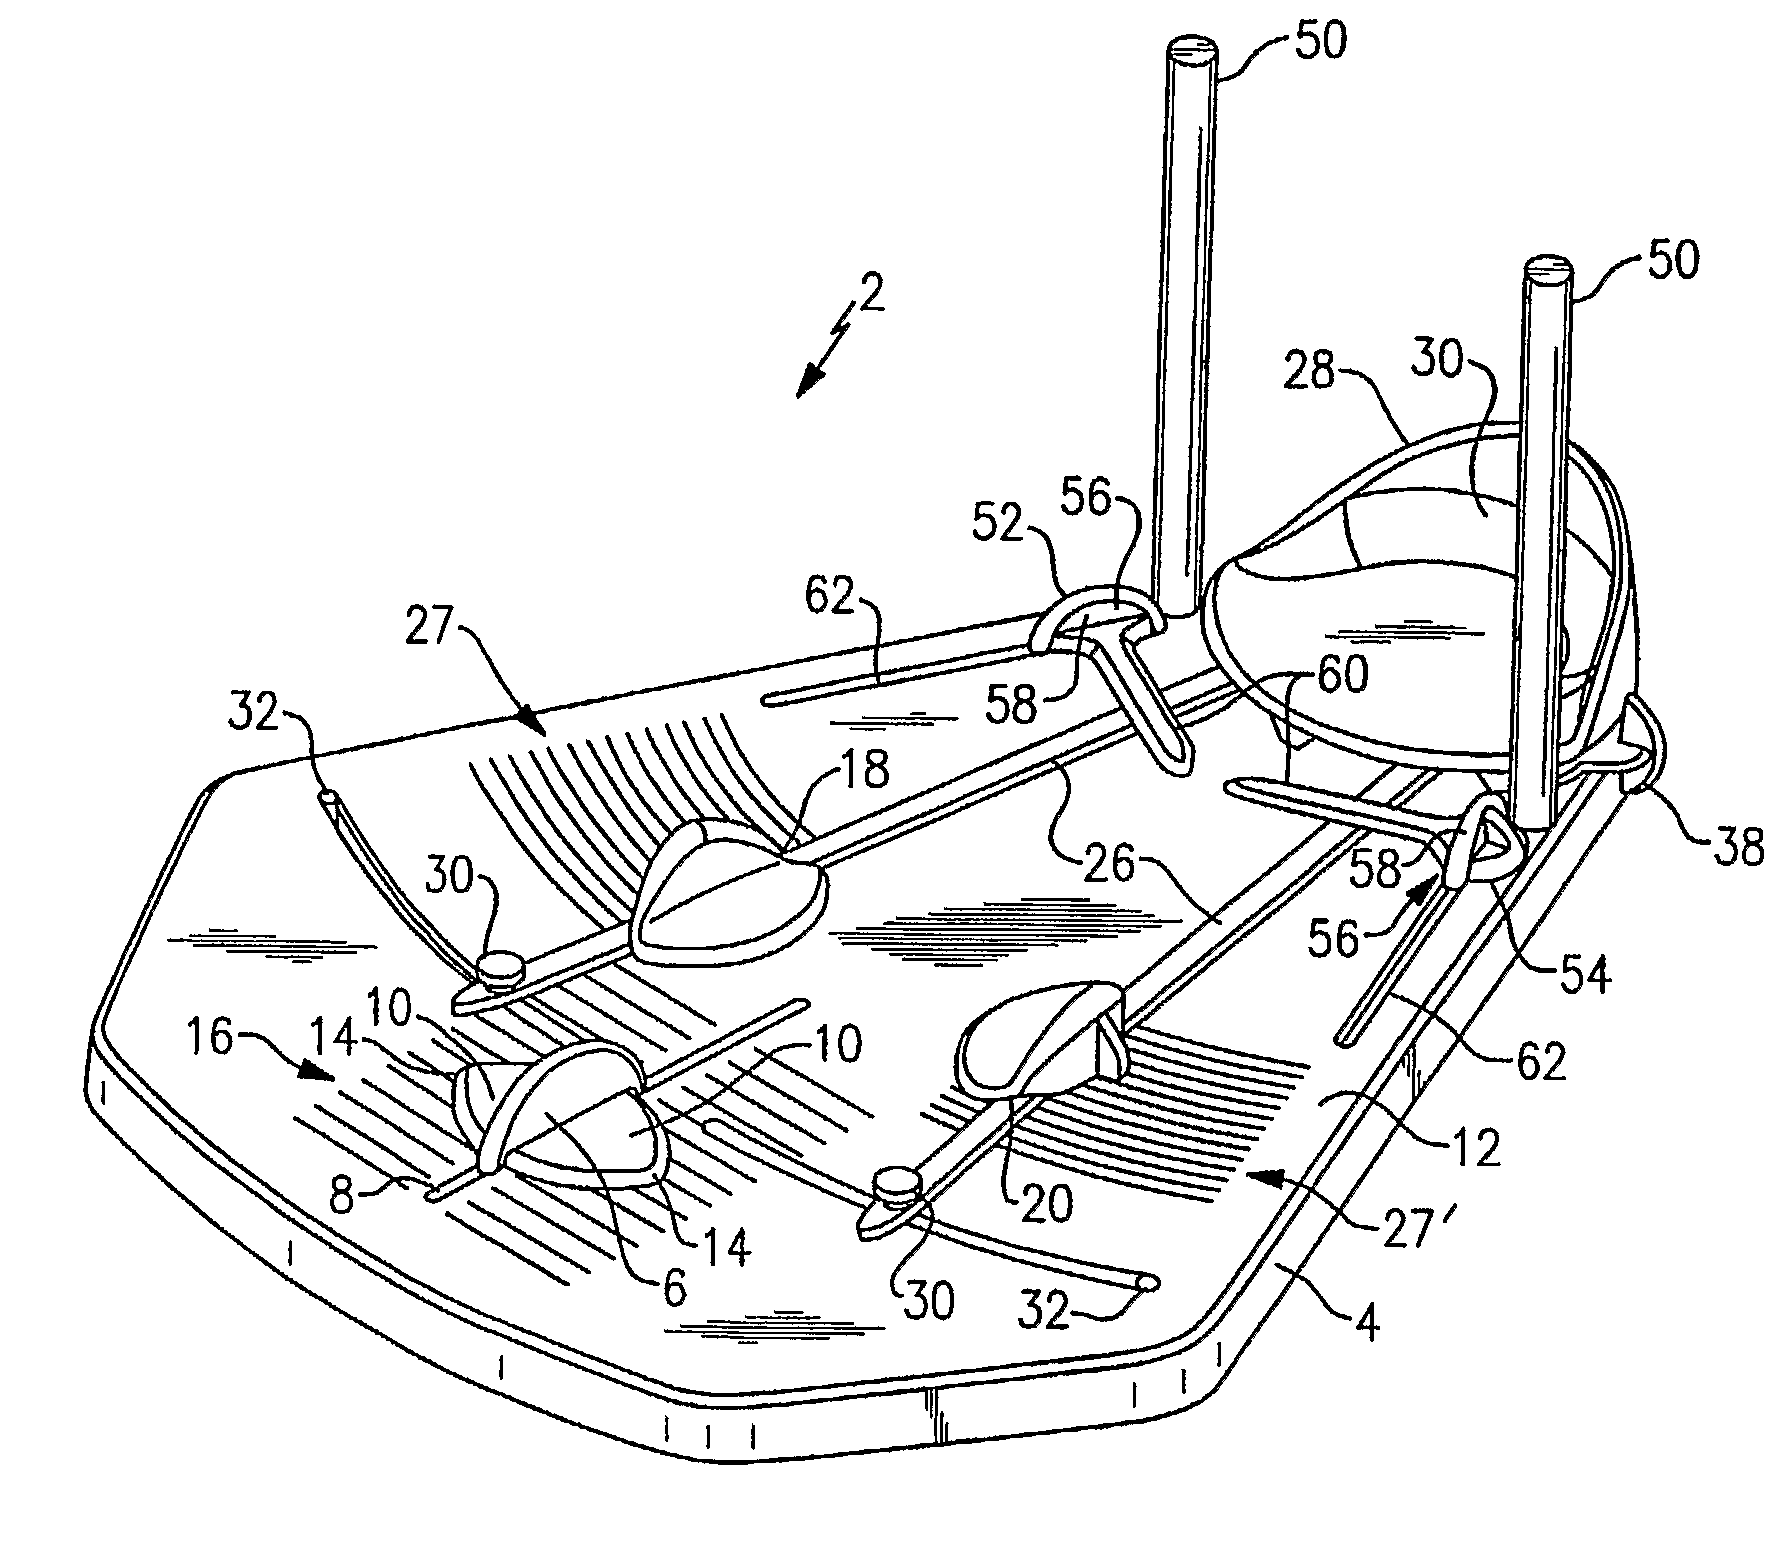 Foot measurement, alignment and evaluation device